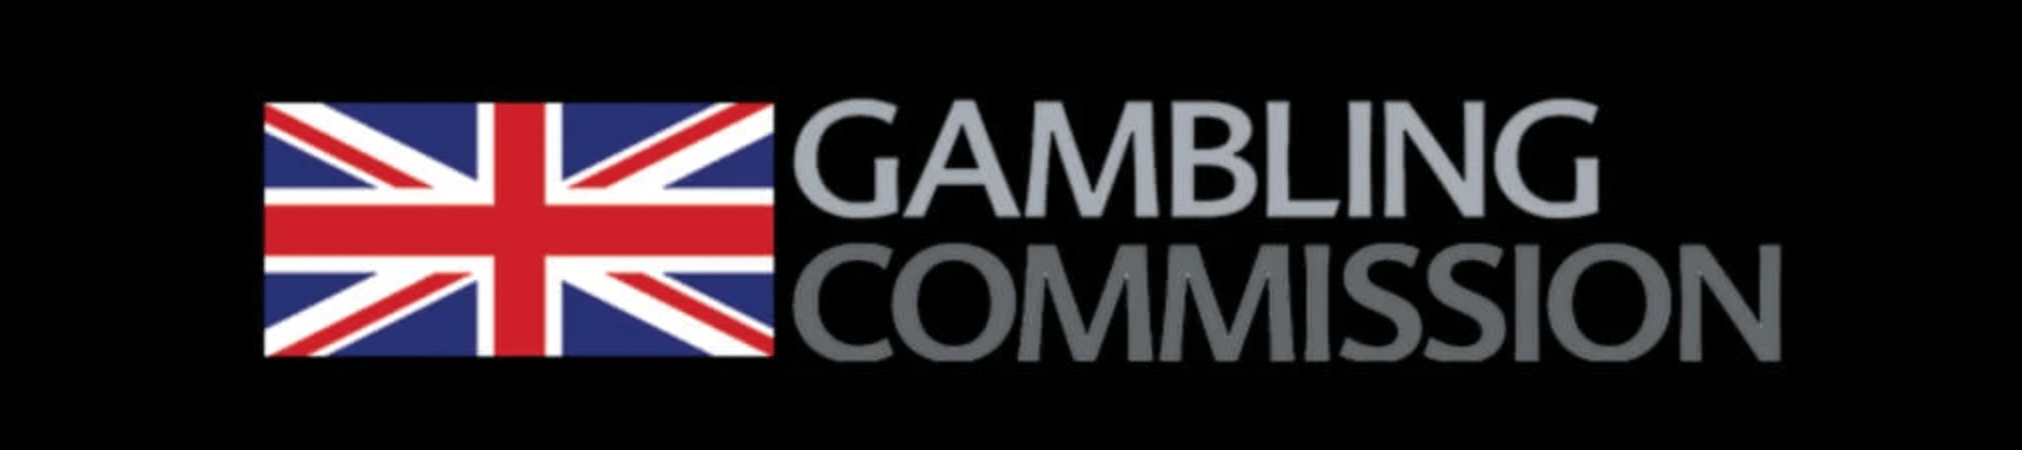 “Sorry for child gif tweet” – Gambling Commission